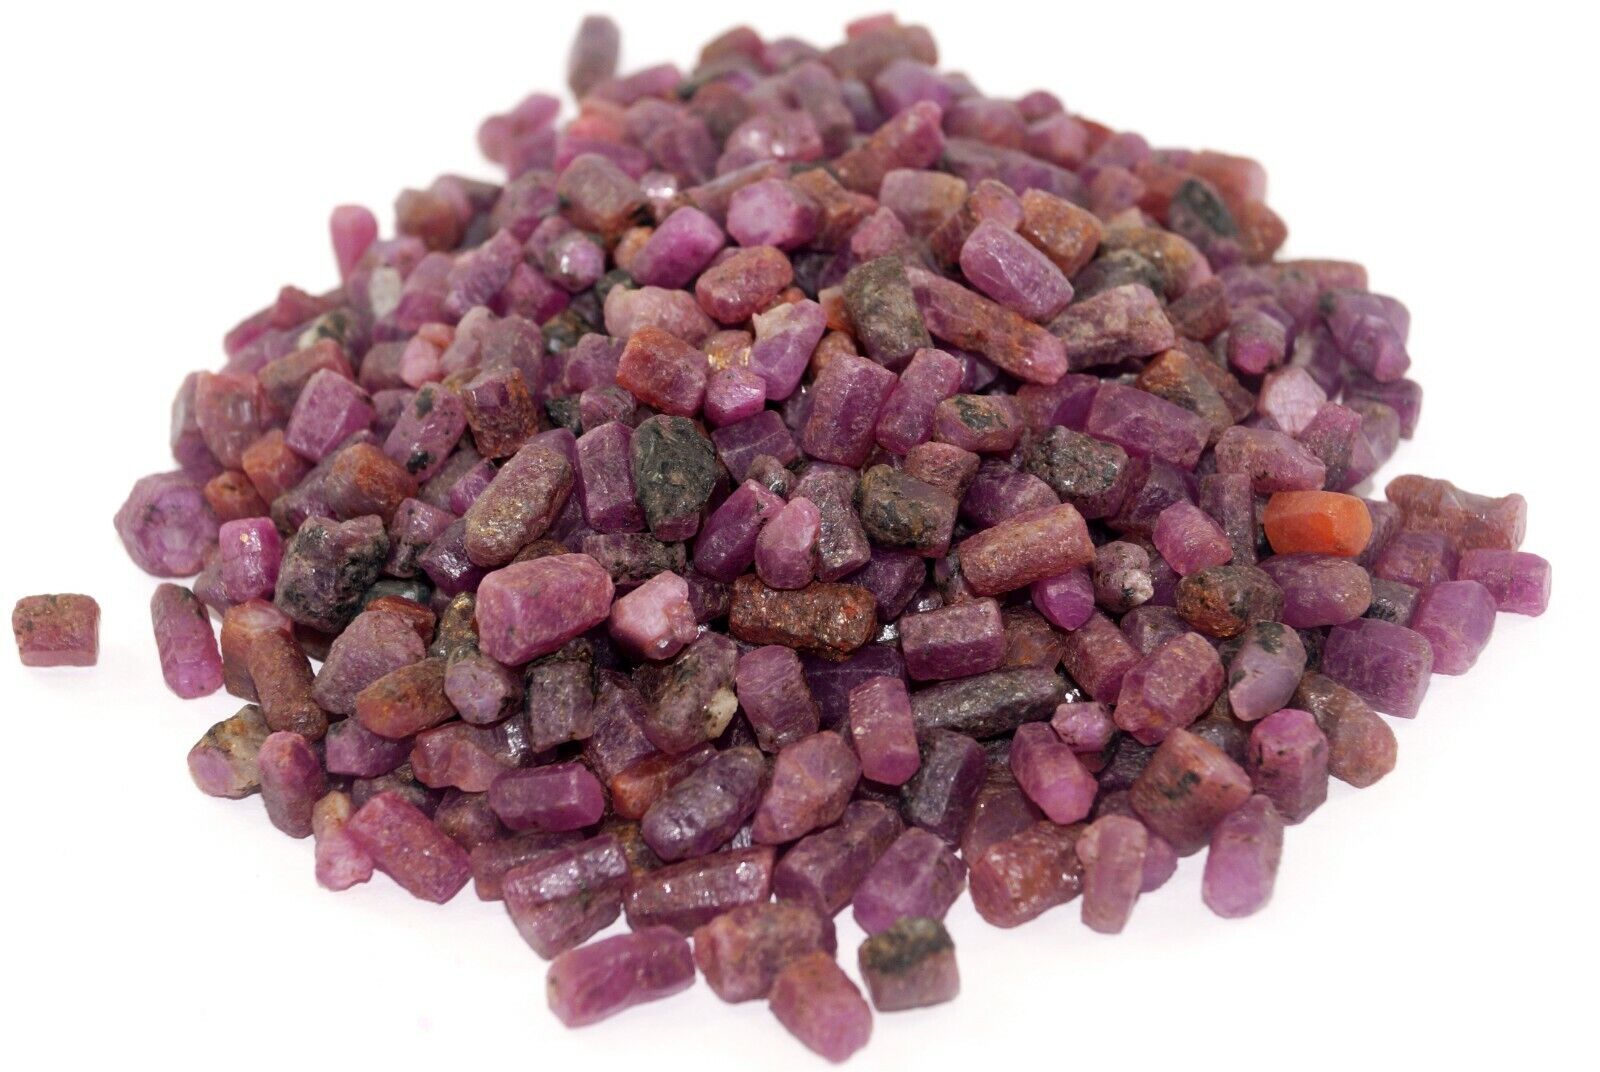 300 Ct GIE Certified Tanzanian Natural Crystal Red Ruby Rough Untreated Lot